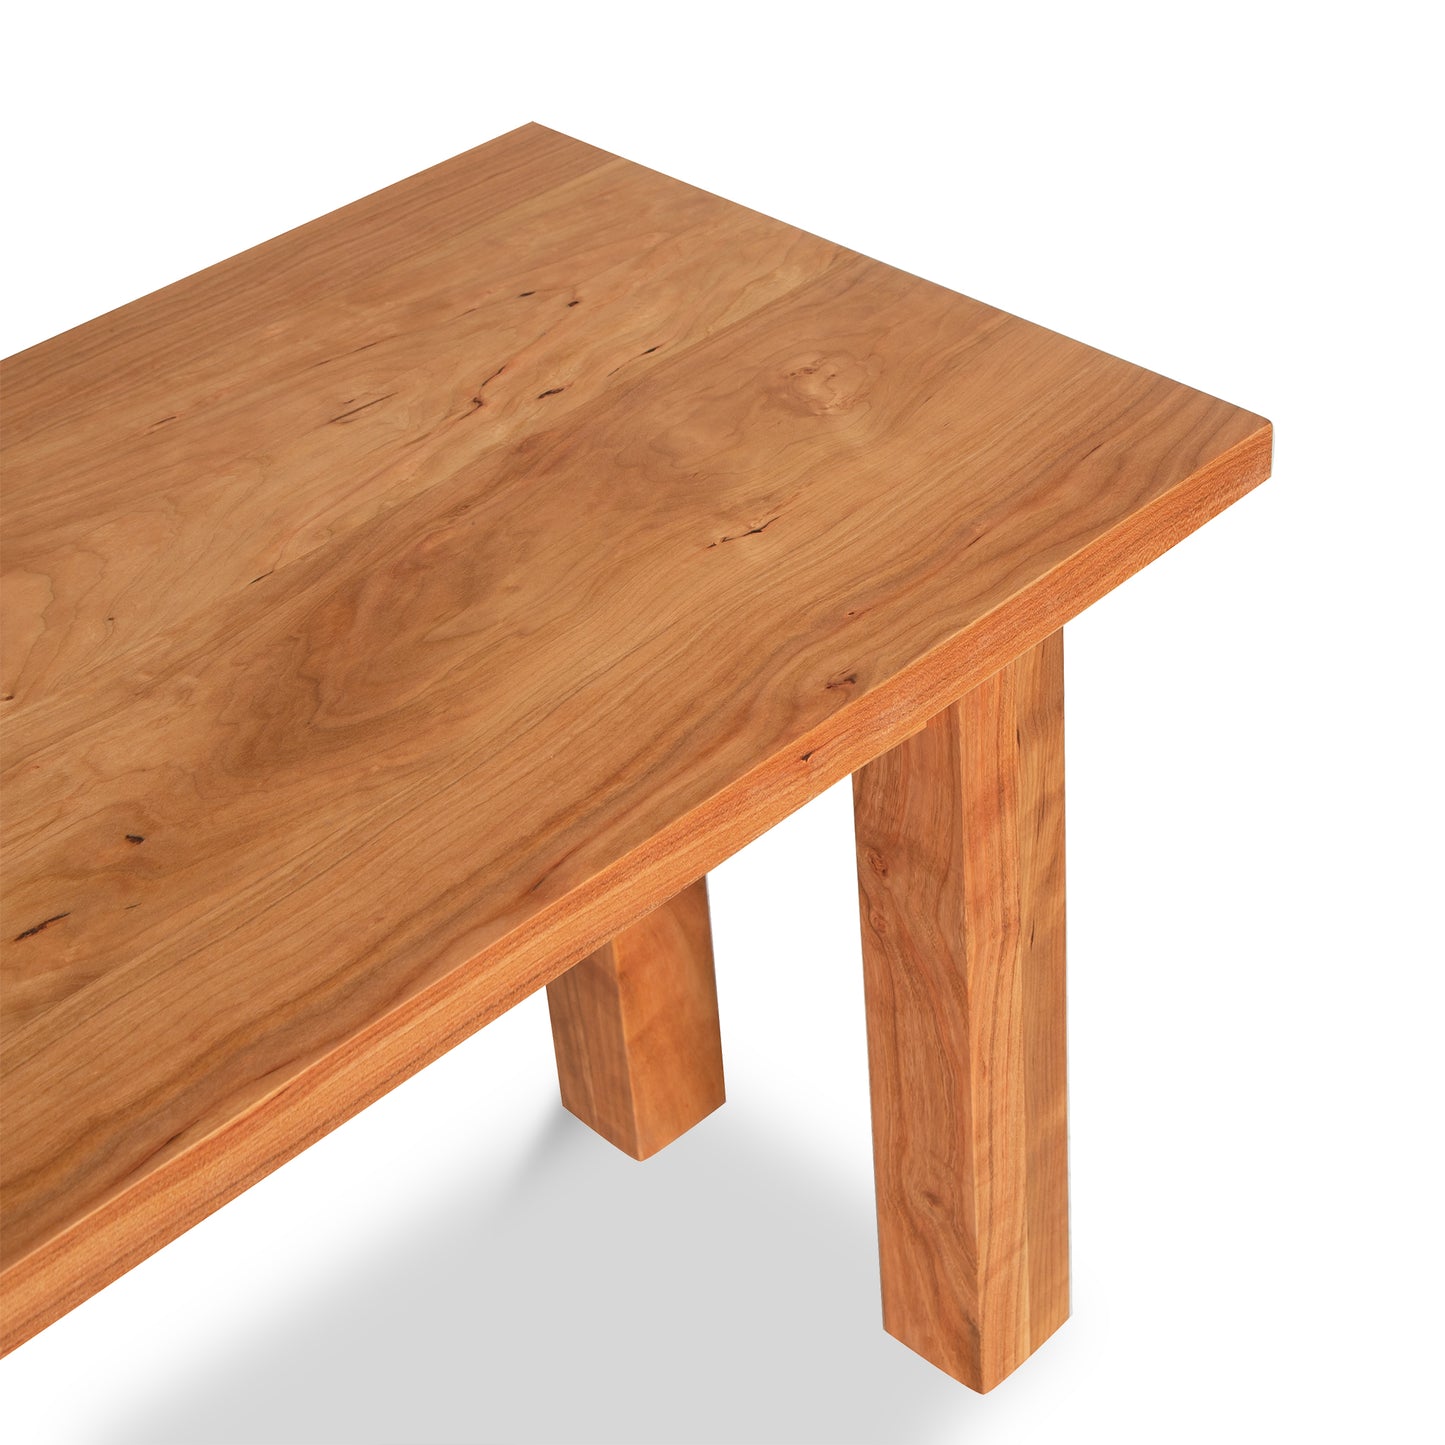 A wooden bench from the Vermont Furniture Designs Burlington Shaker Collection with a smooth finish and visible grain, featuring a simple design with straight legs, shown on a white background.